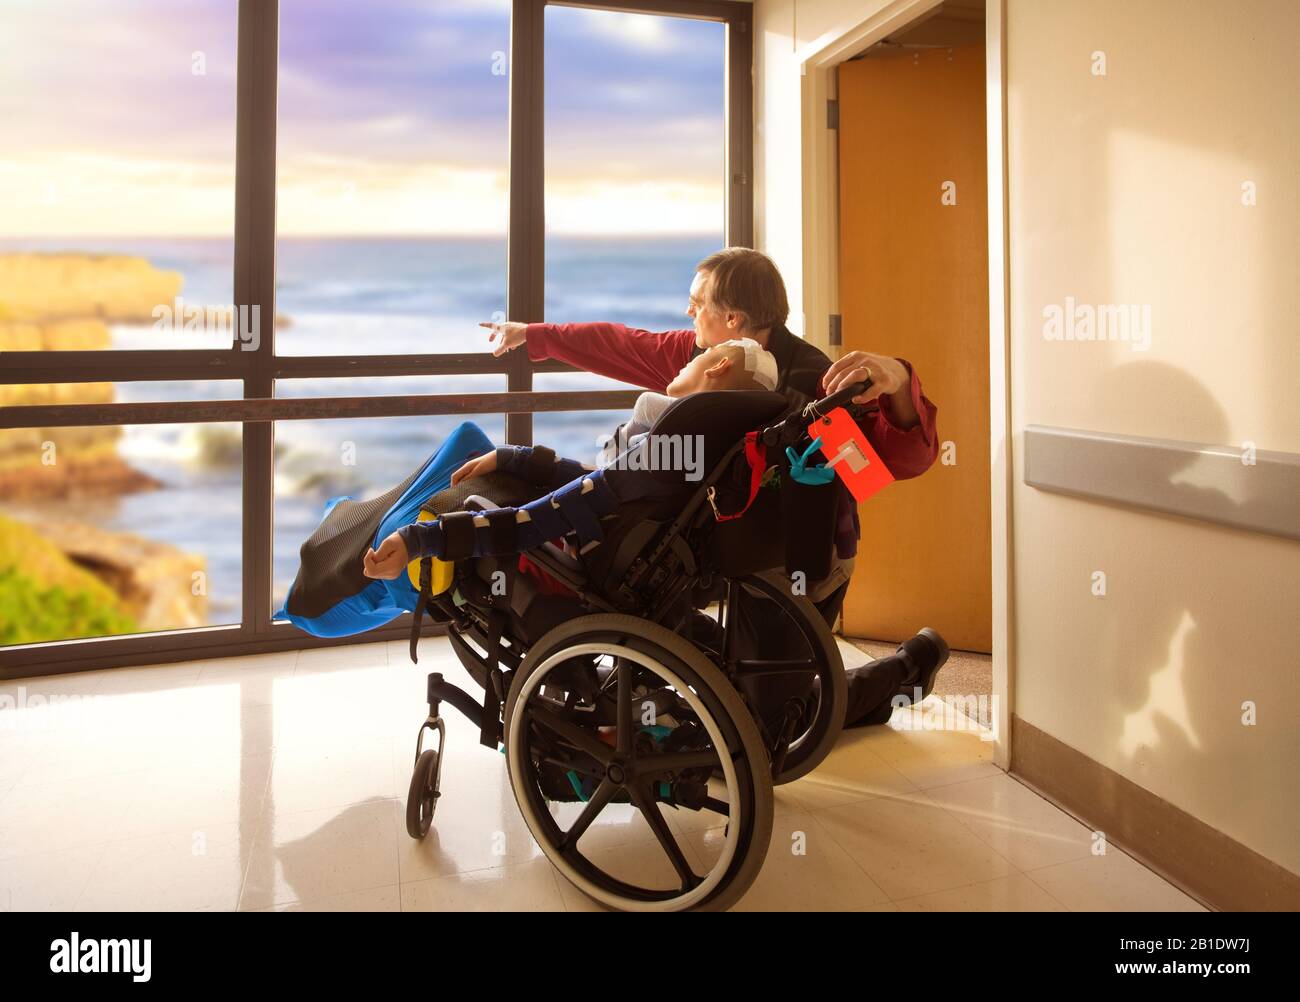 Father kneeling next to disabled son in wheelchair looking out hospital window at ocean and cliffs outdoors. Child recently had head surgery. Stock Photo